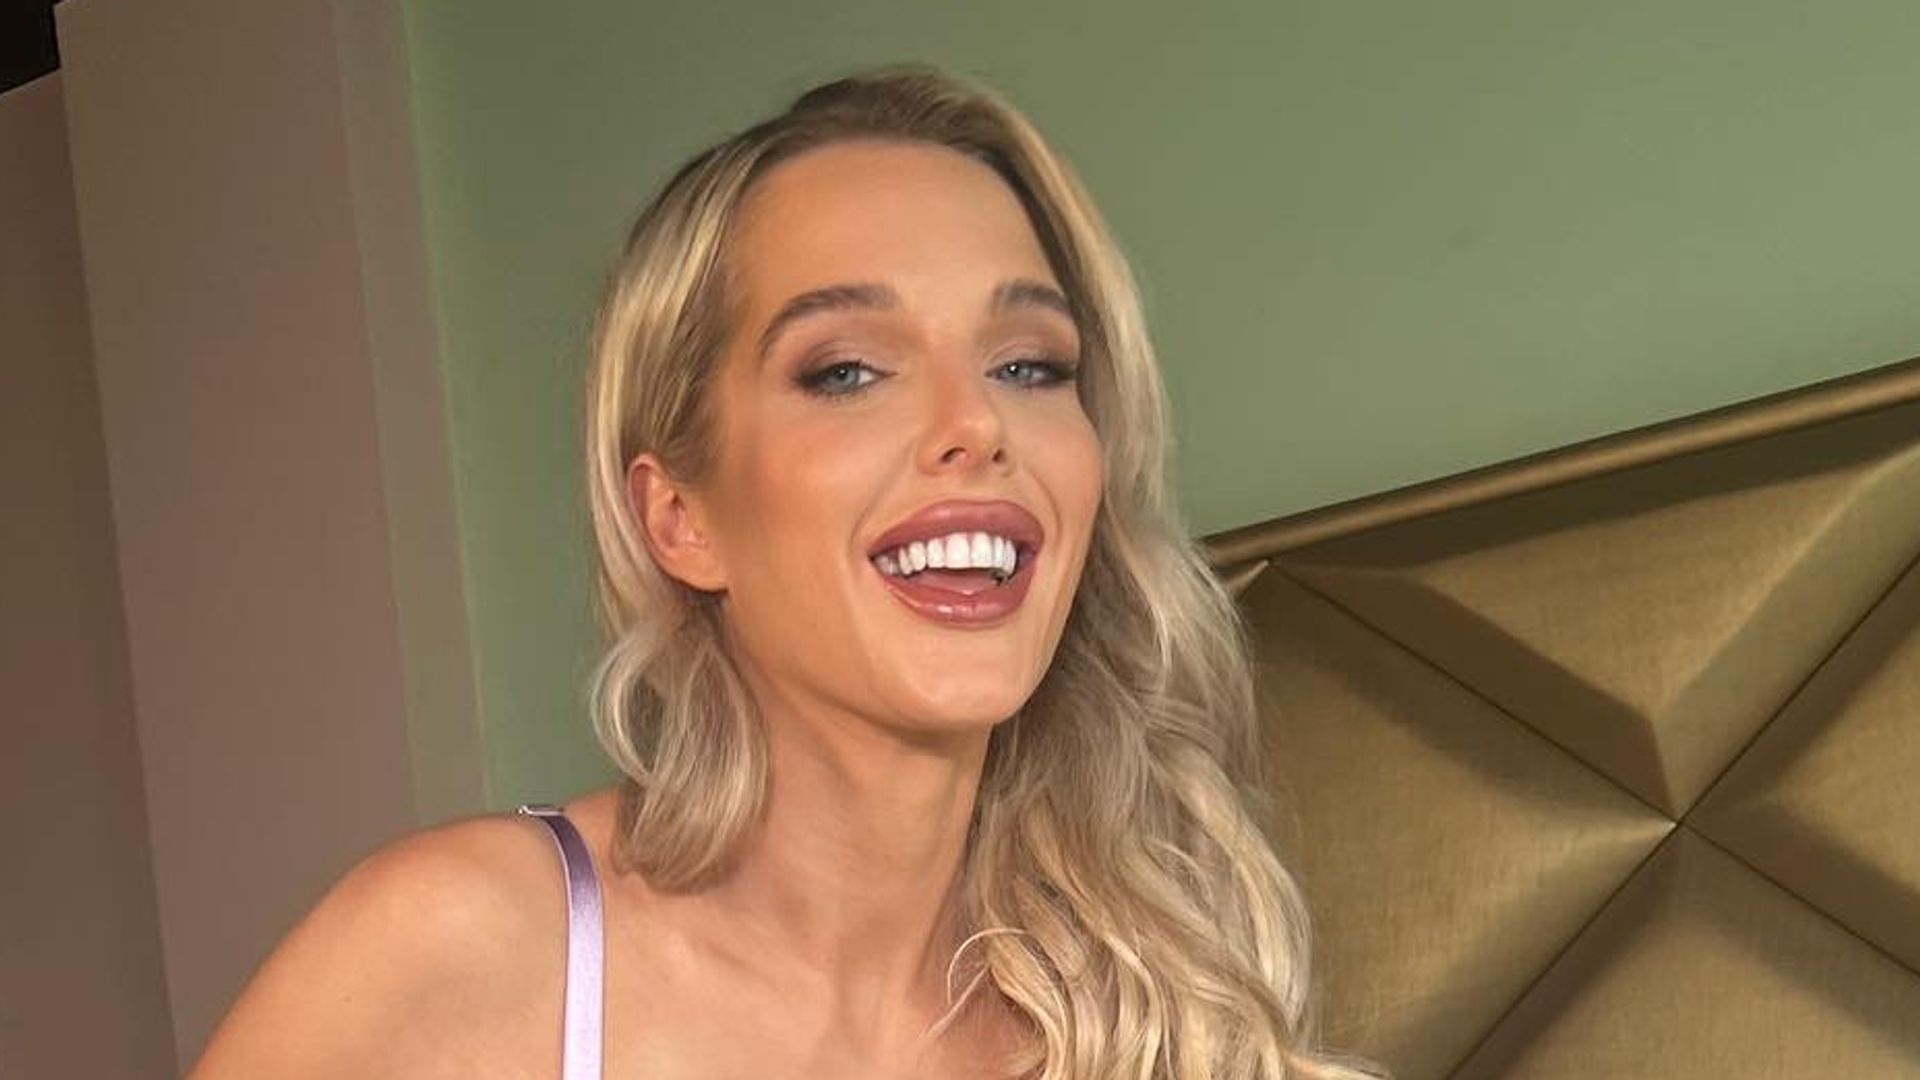 Helen Flanagan has never looked better and the star rocked a pretty lilac lingerie set in a new Instagram photo